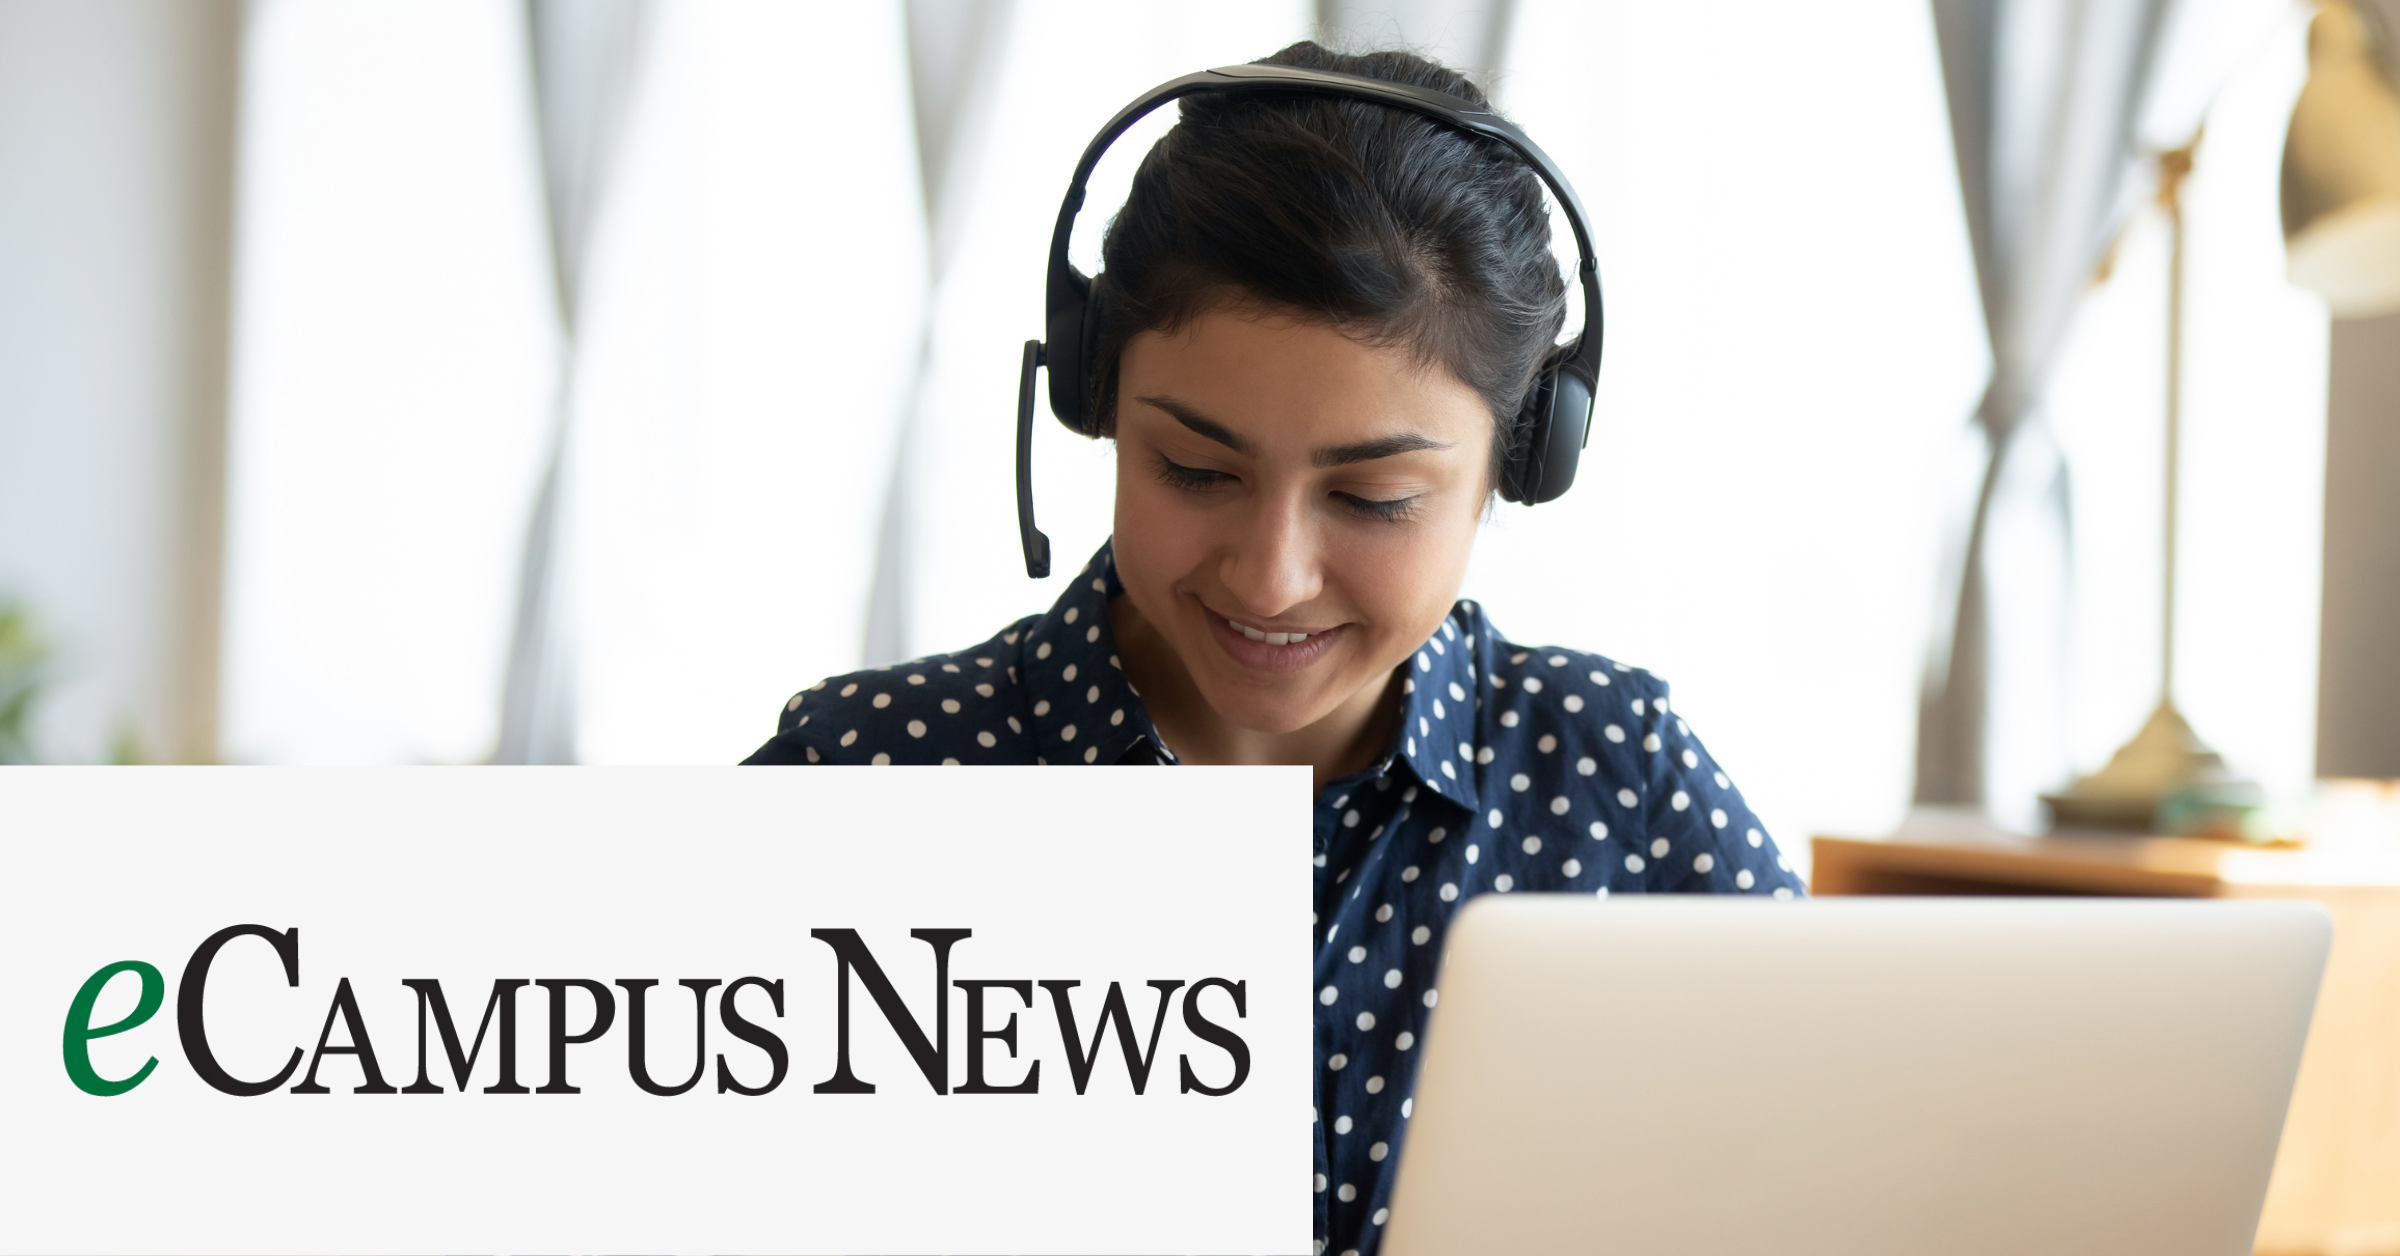 Photo of a woman with headset on working at a laptop with the eCampus News logo overlayed